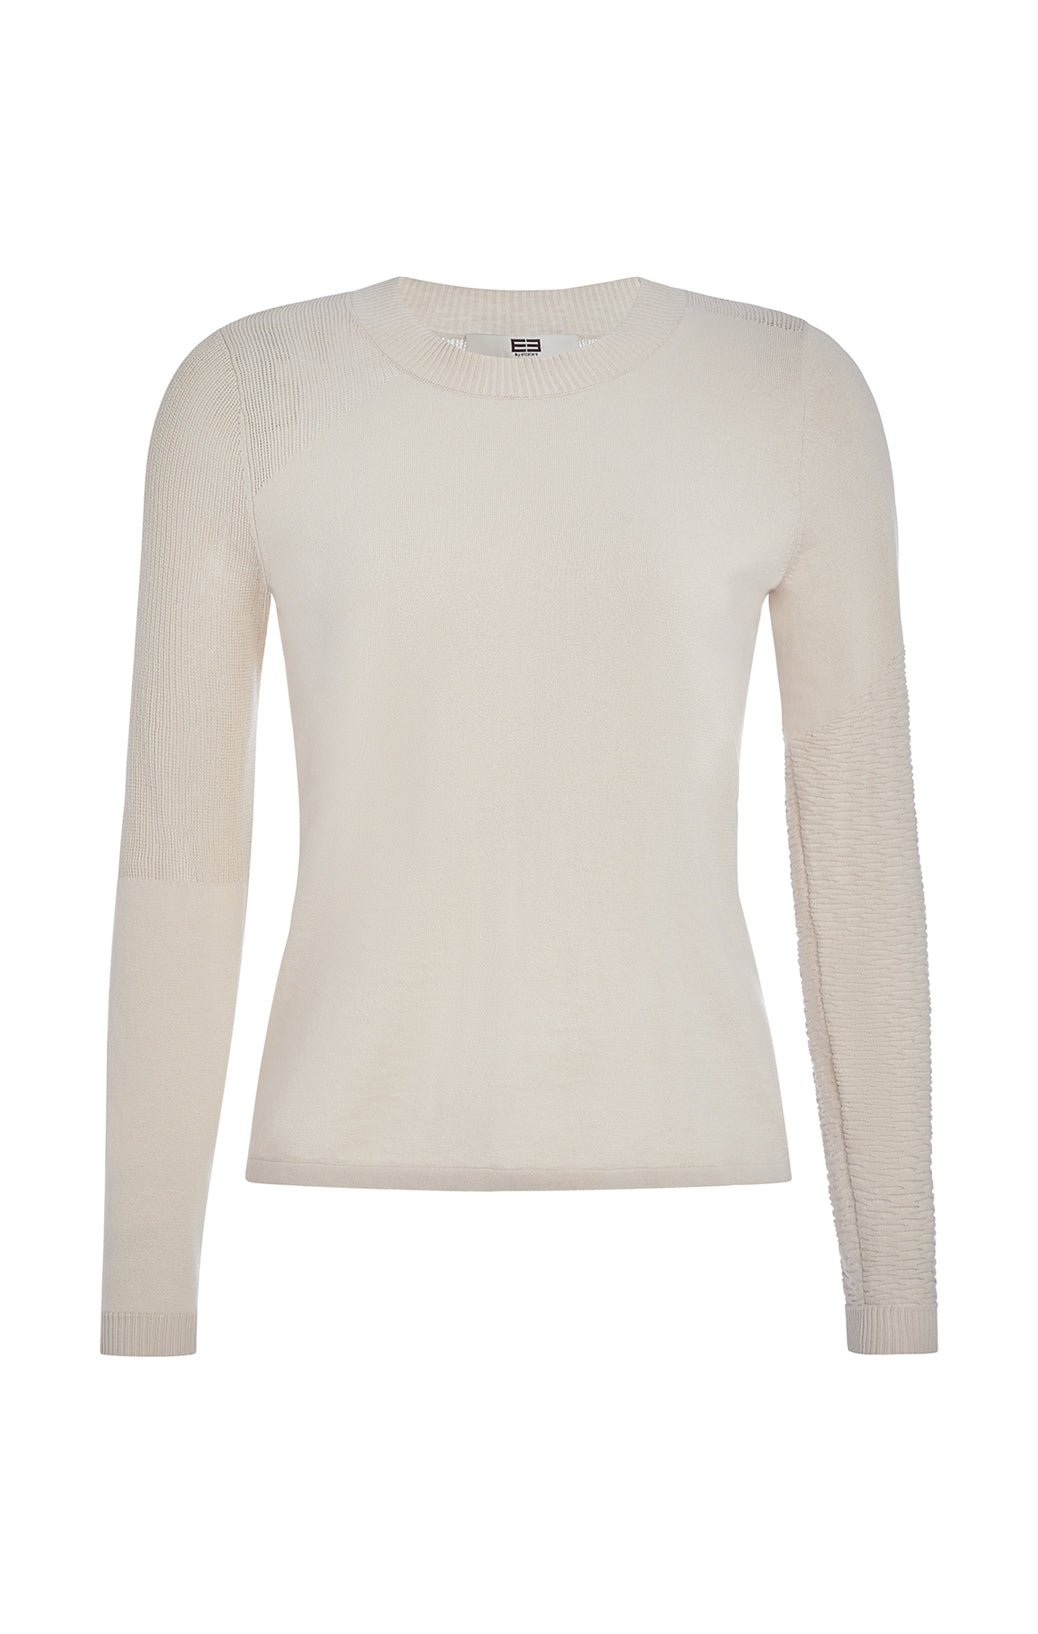 Sea Campion - Pullover Linen Mesh Knit Top - Product Image